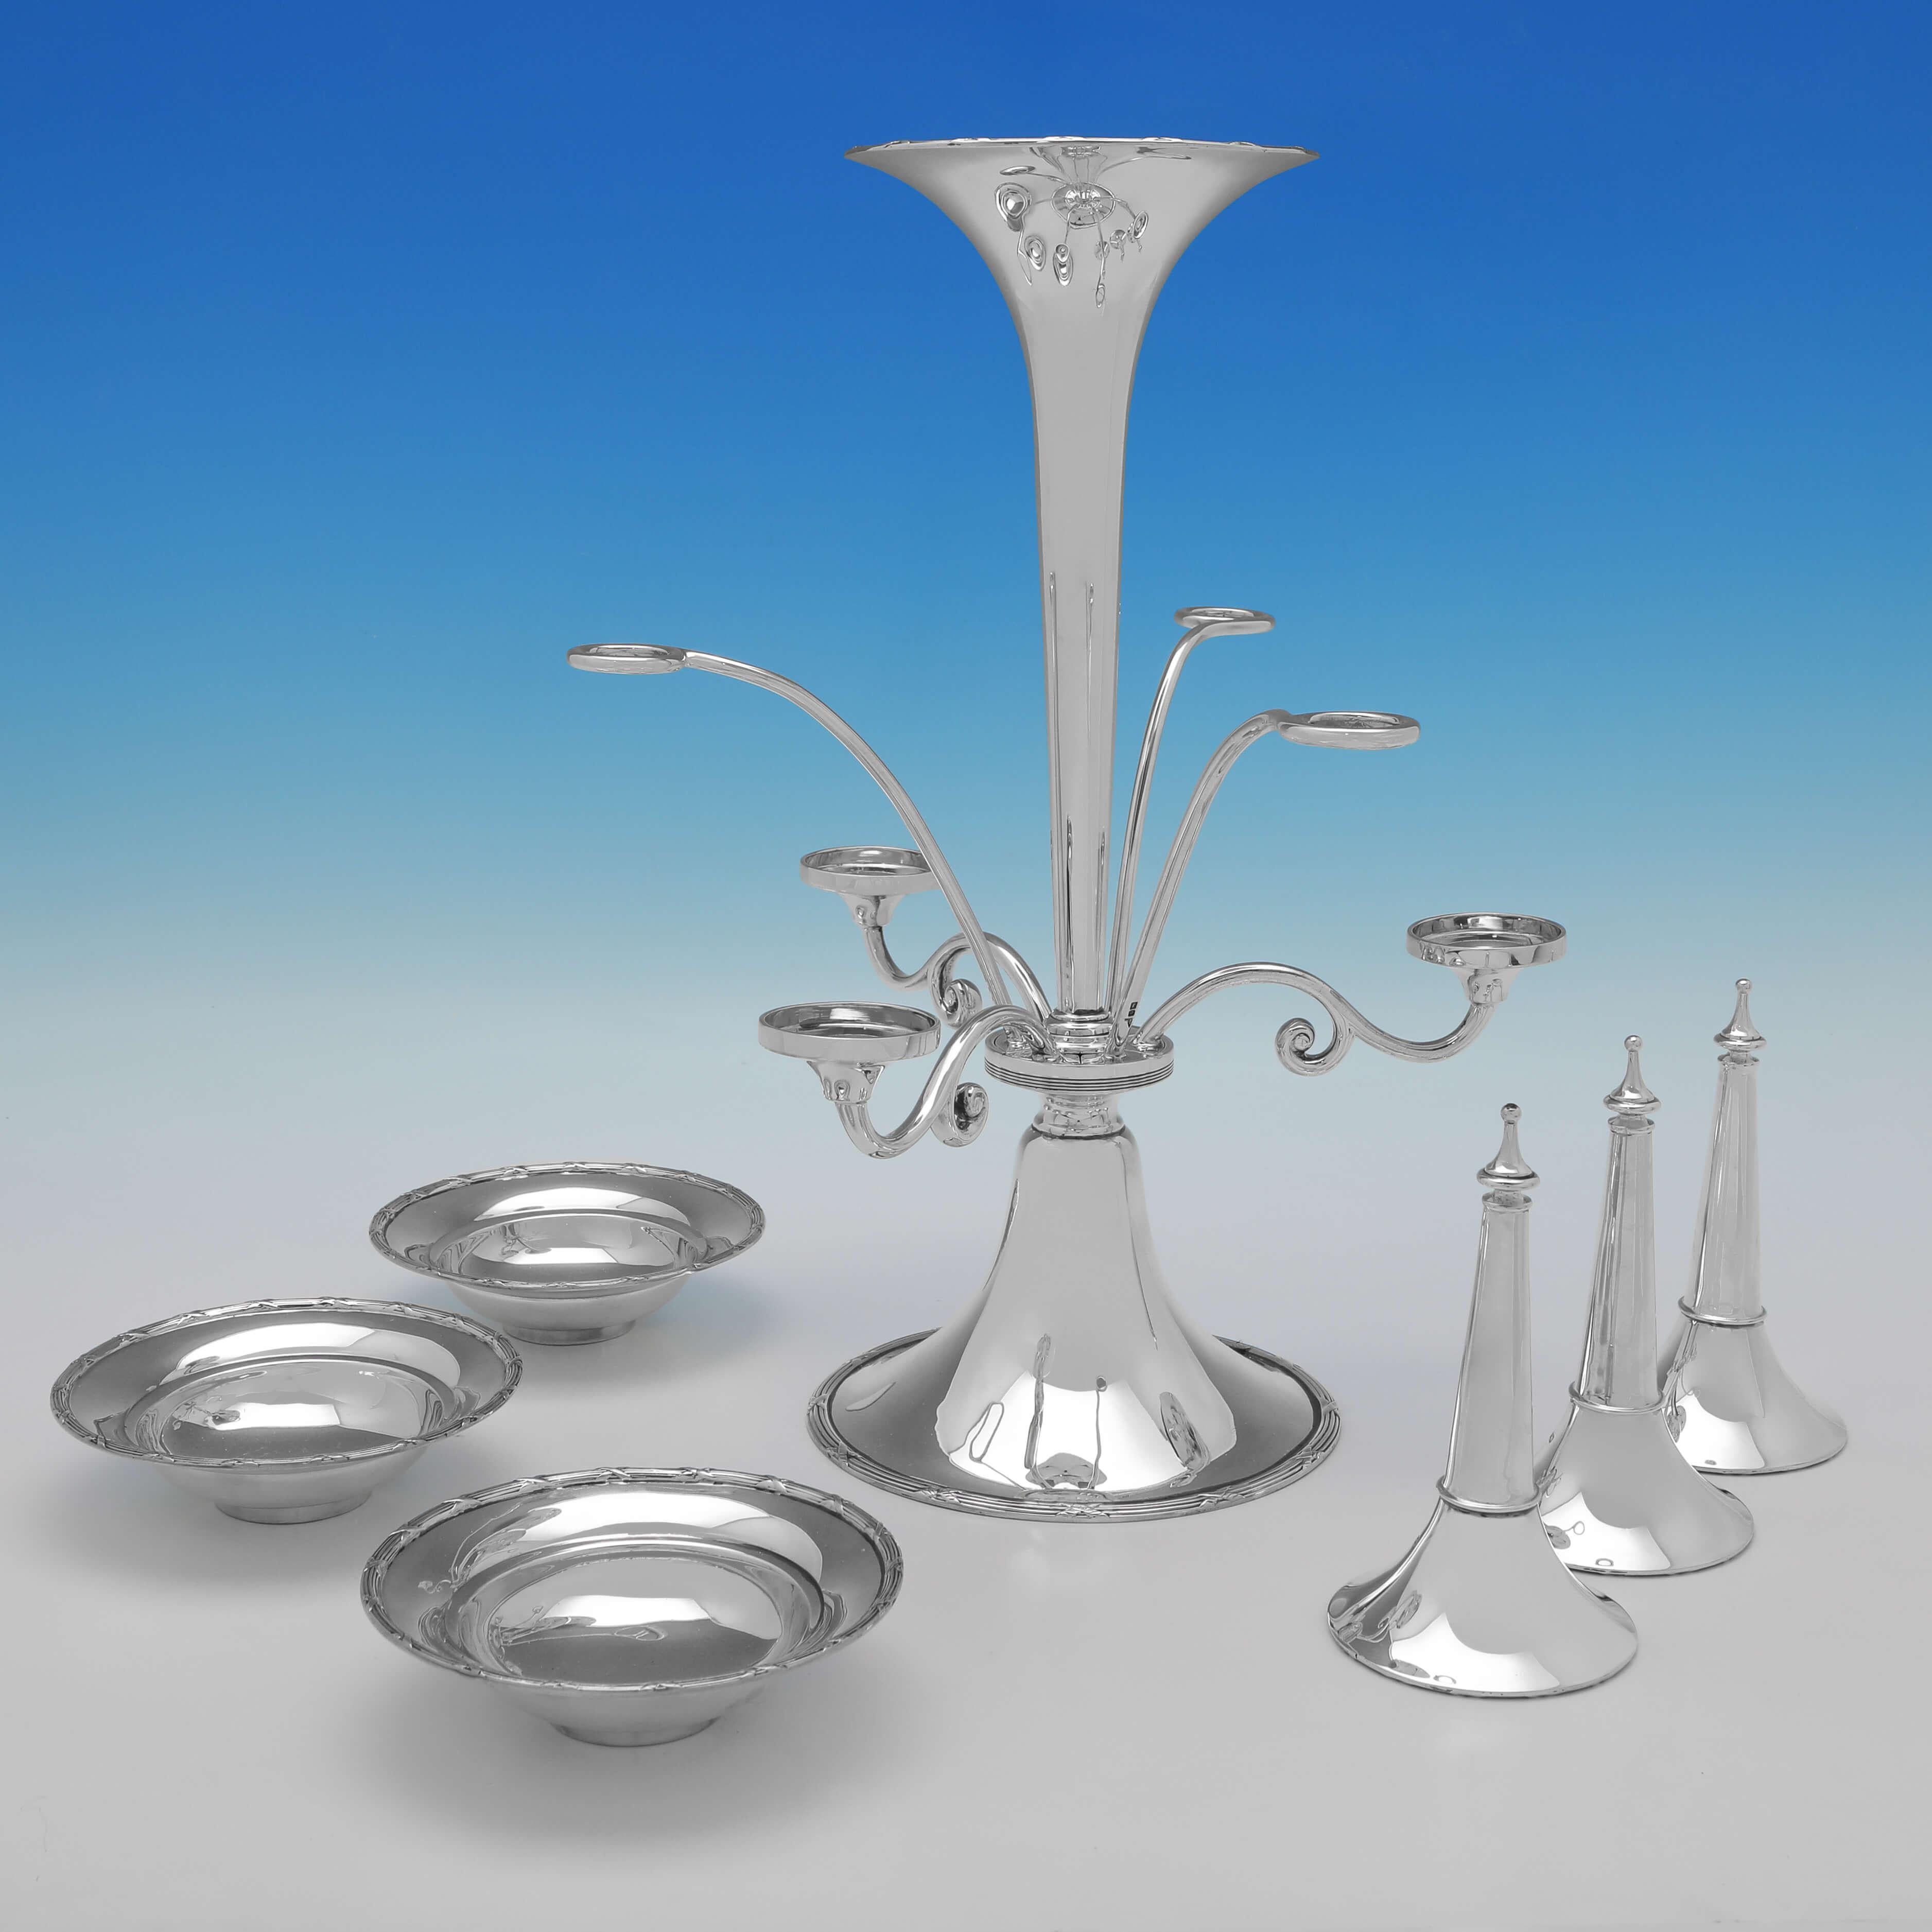 Hallmarked in Sheffield in 1910 by Walker & Hall, this charming, Antique Sterling Silver Epergne, has three side dishes, three smaller side vases and a larger central vase for flowers. 

The epergne measures 15